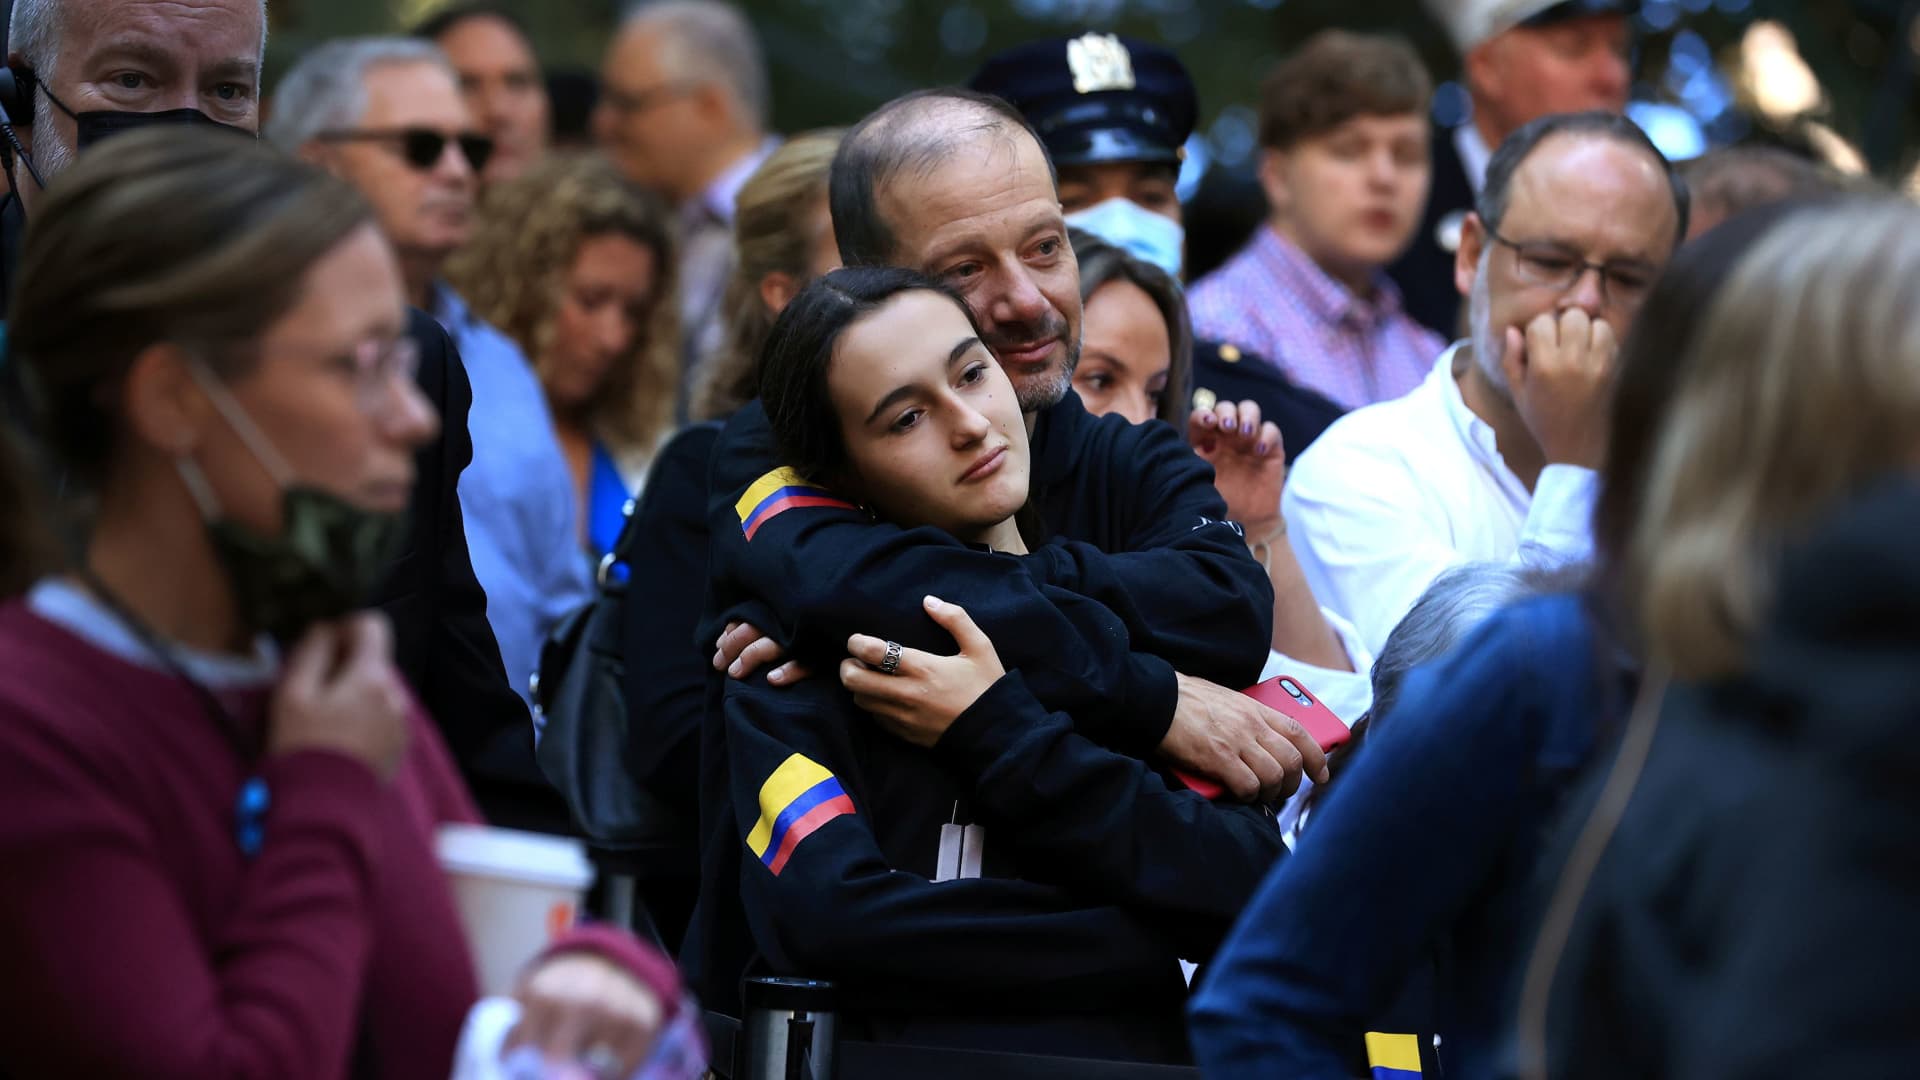 Family members and loved ones of victims attend the annual September 11 Commemoration Ceremony at the National 9/11 Memorial and Museum on September 11, 2021 in New York City U.S., September 11, 2021.